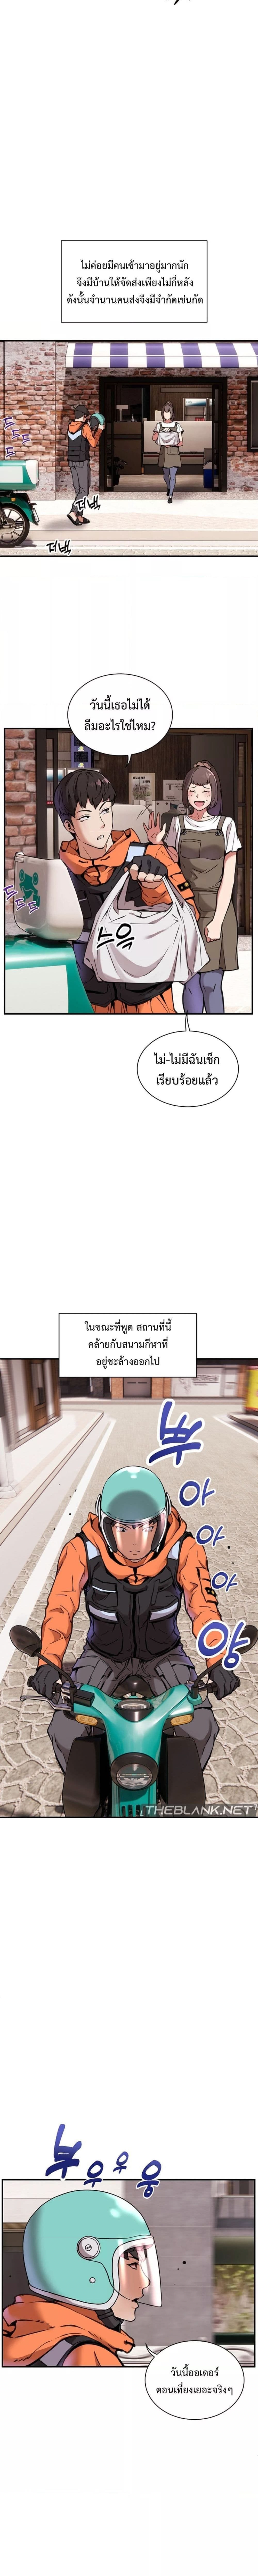 Driver in the New City ตอนที่ 1 ภาพ 1